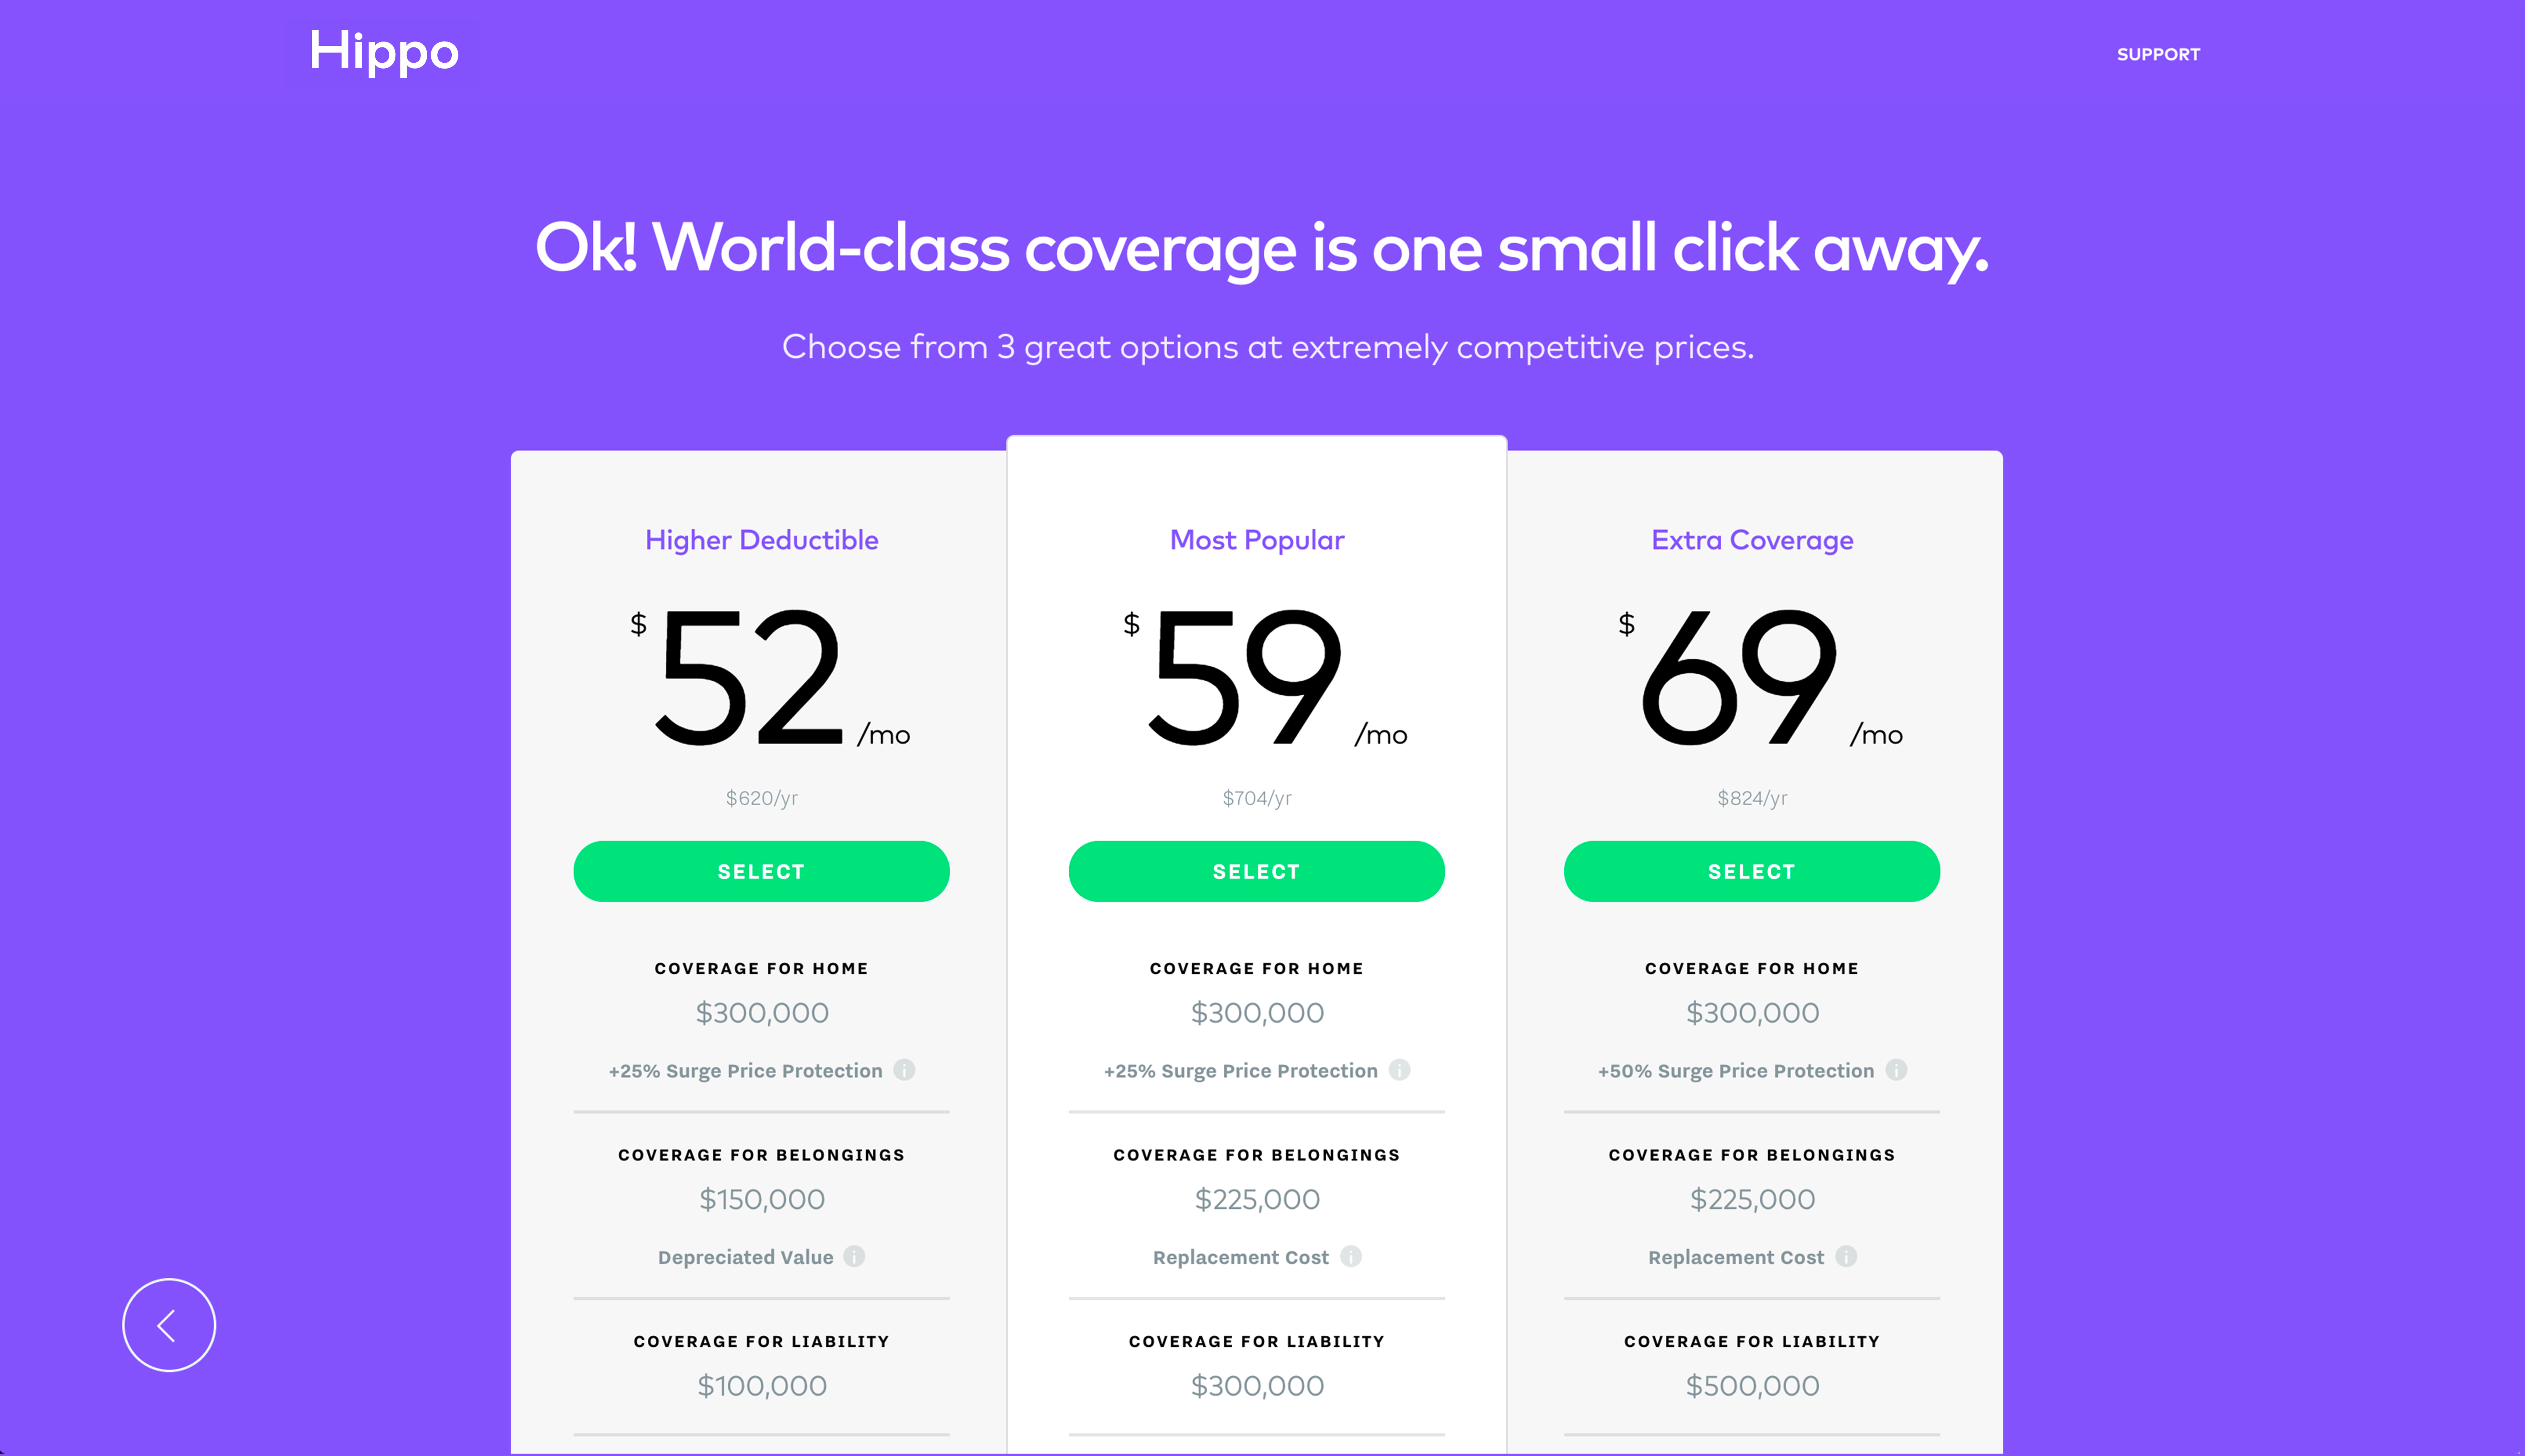 Hippo Launches With Promise Of 60 Second Homeowners Insurance Quote